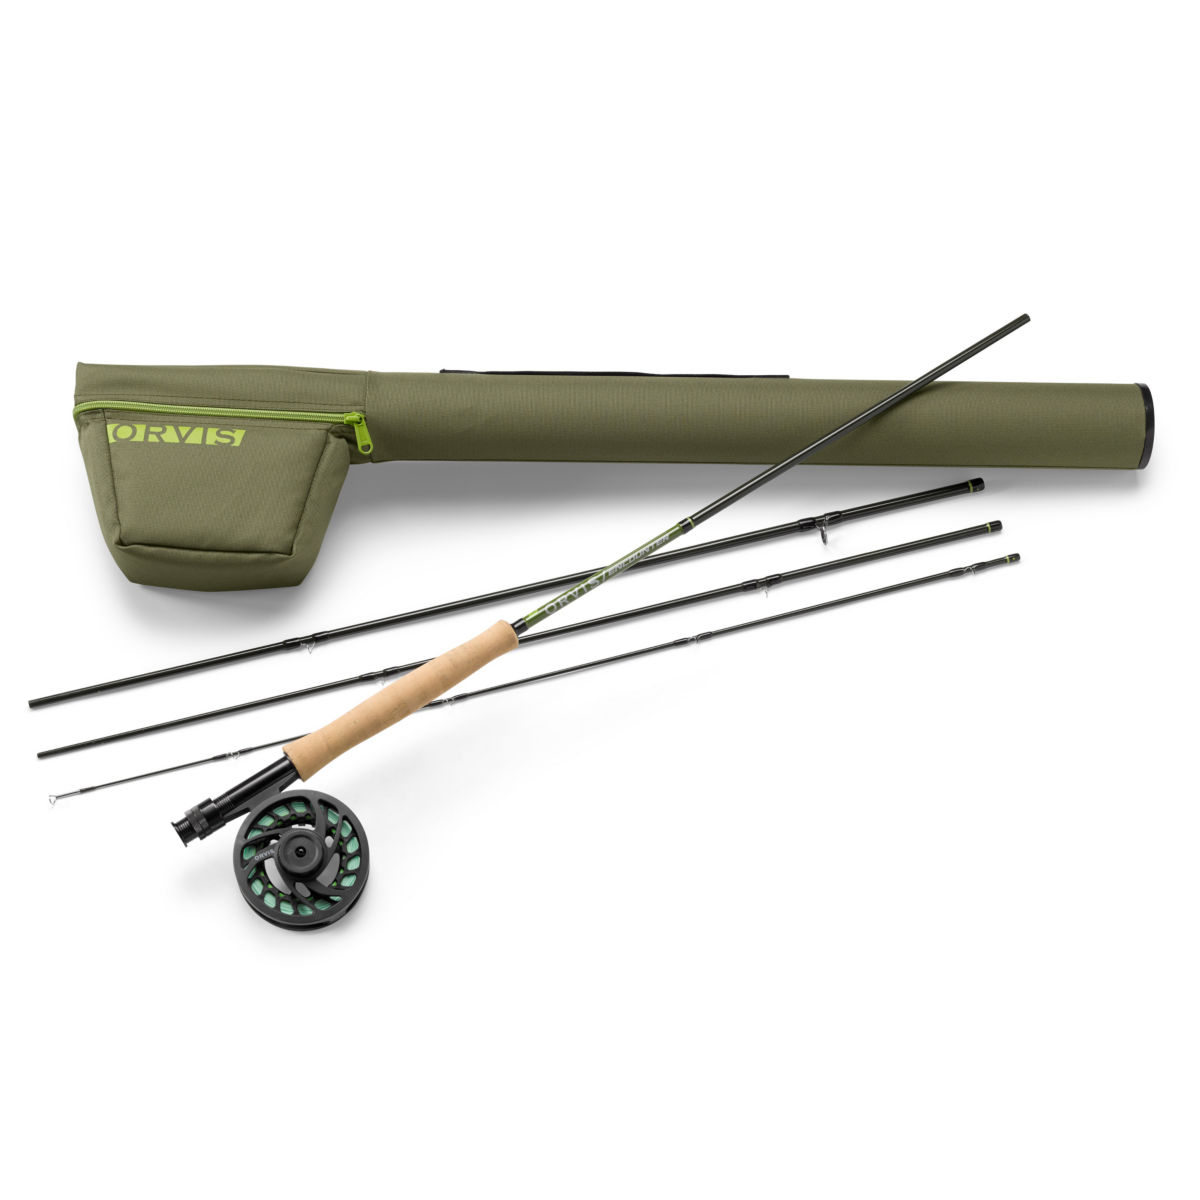 9'0" 8wt Orvis Encounter 908-4 Fly Rod Outfit 